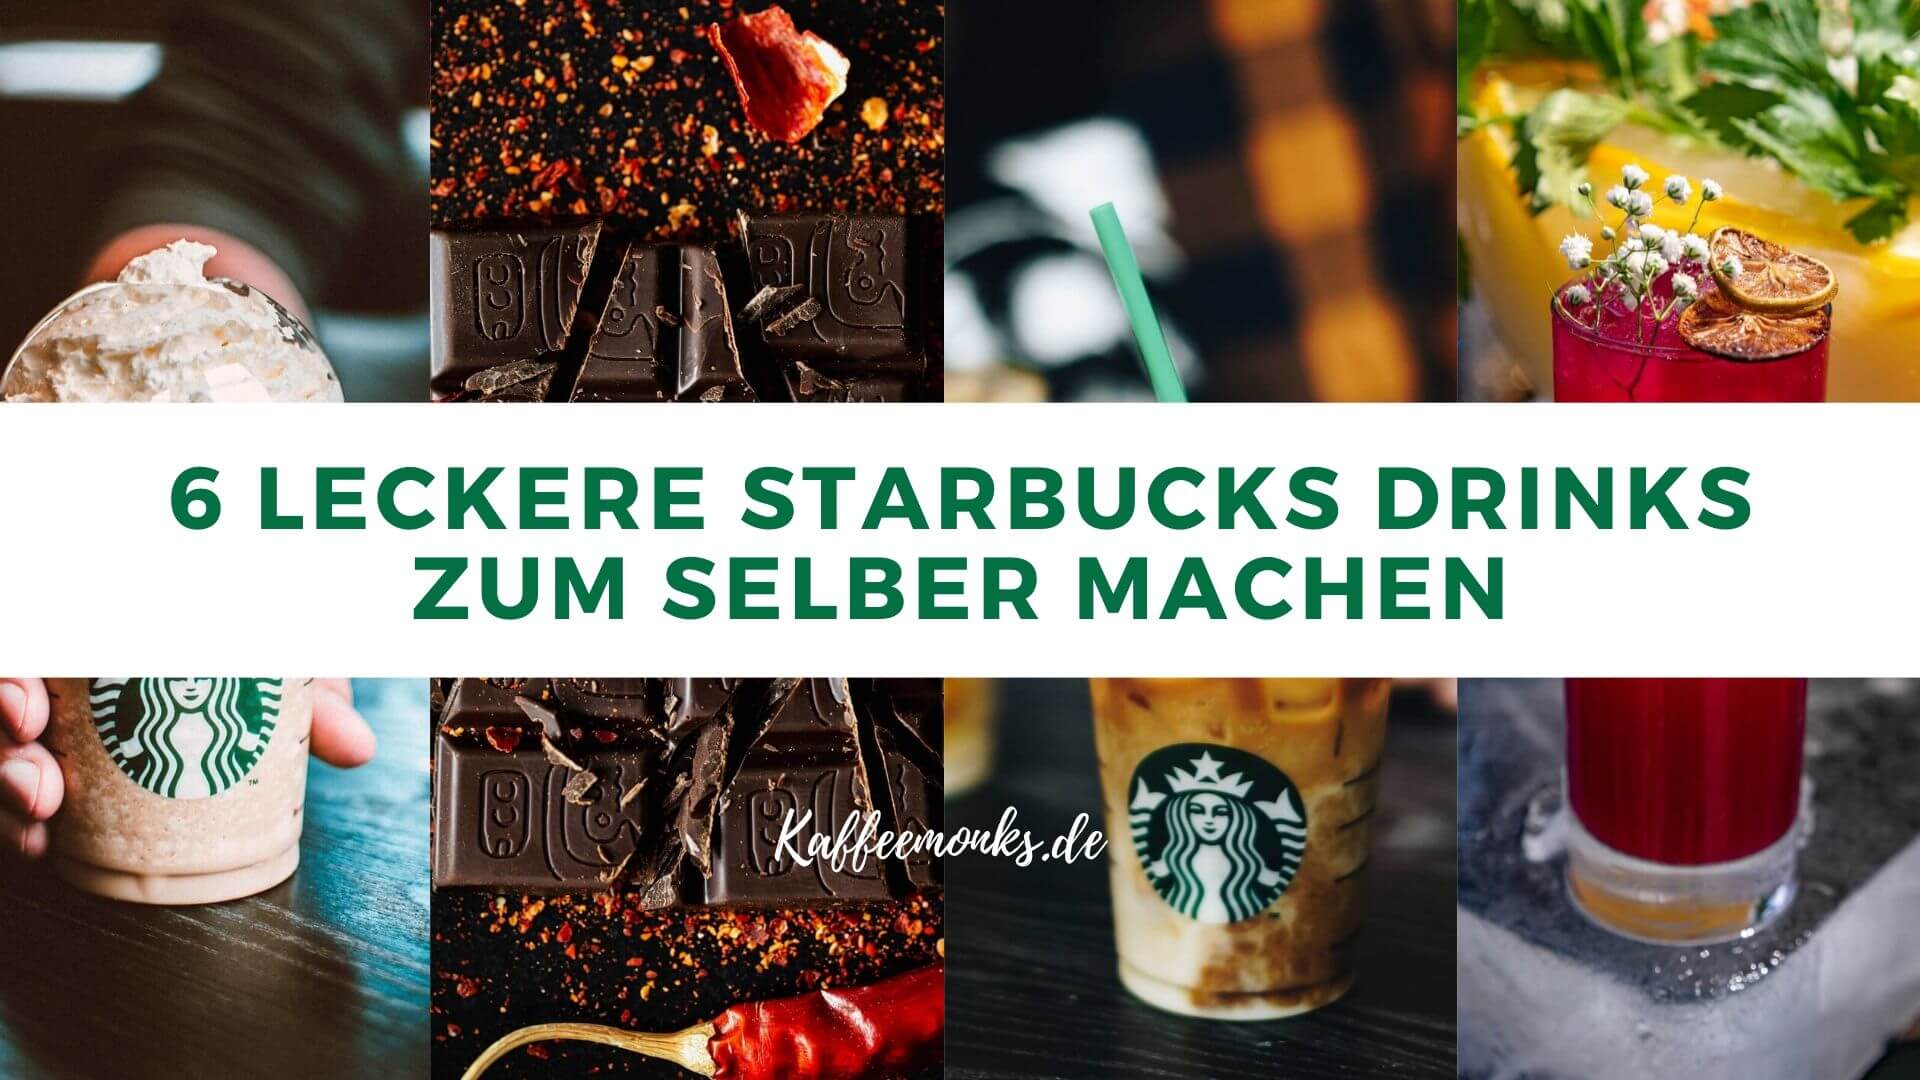 You are currently viewing DIY STARBUCKS GETRÄNKE SELBER MACHEN